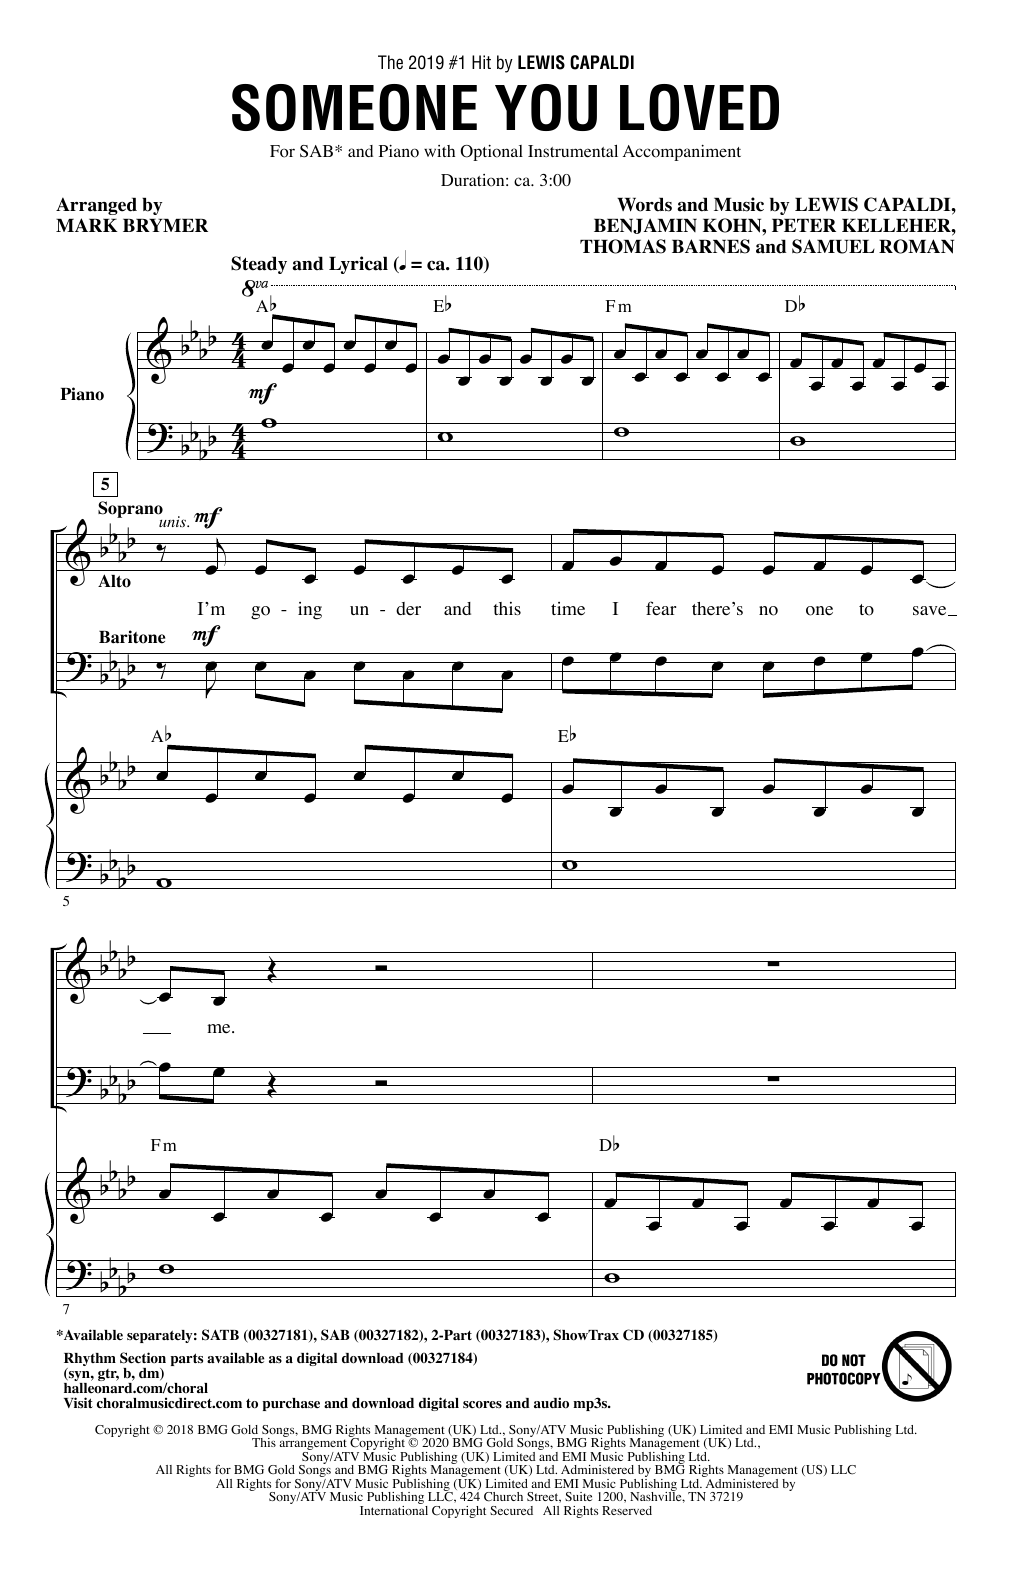 Download Lewis Capaldi Someone You Loved (arr. Mark Brymer) Sheet Music